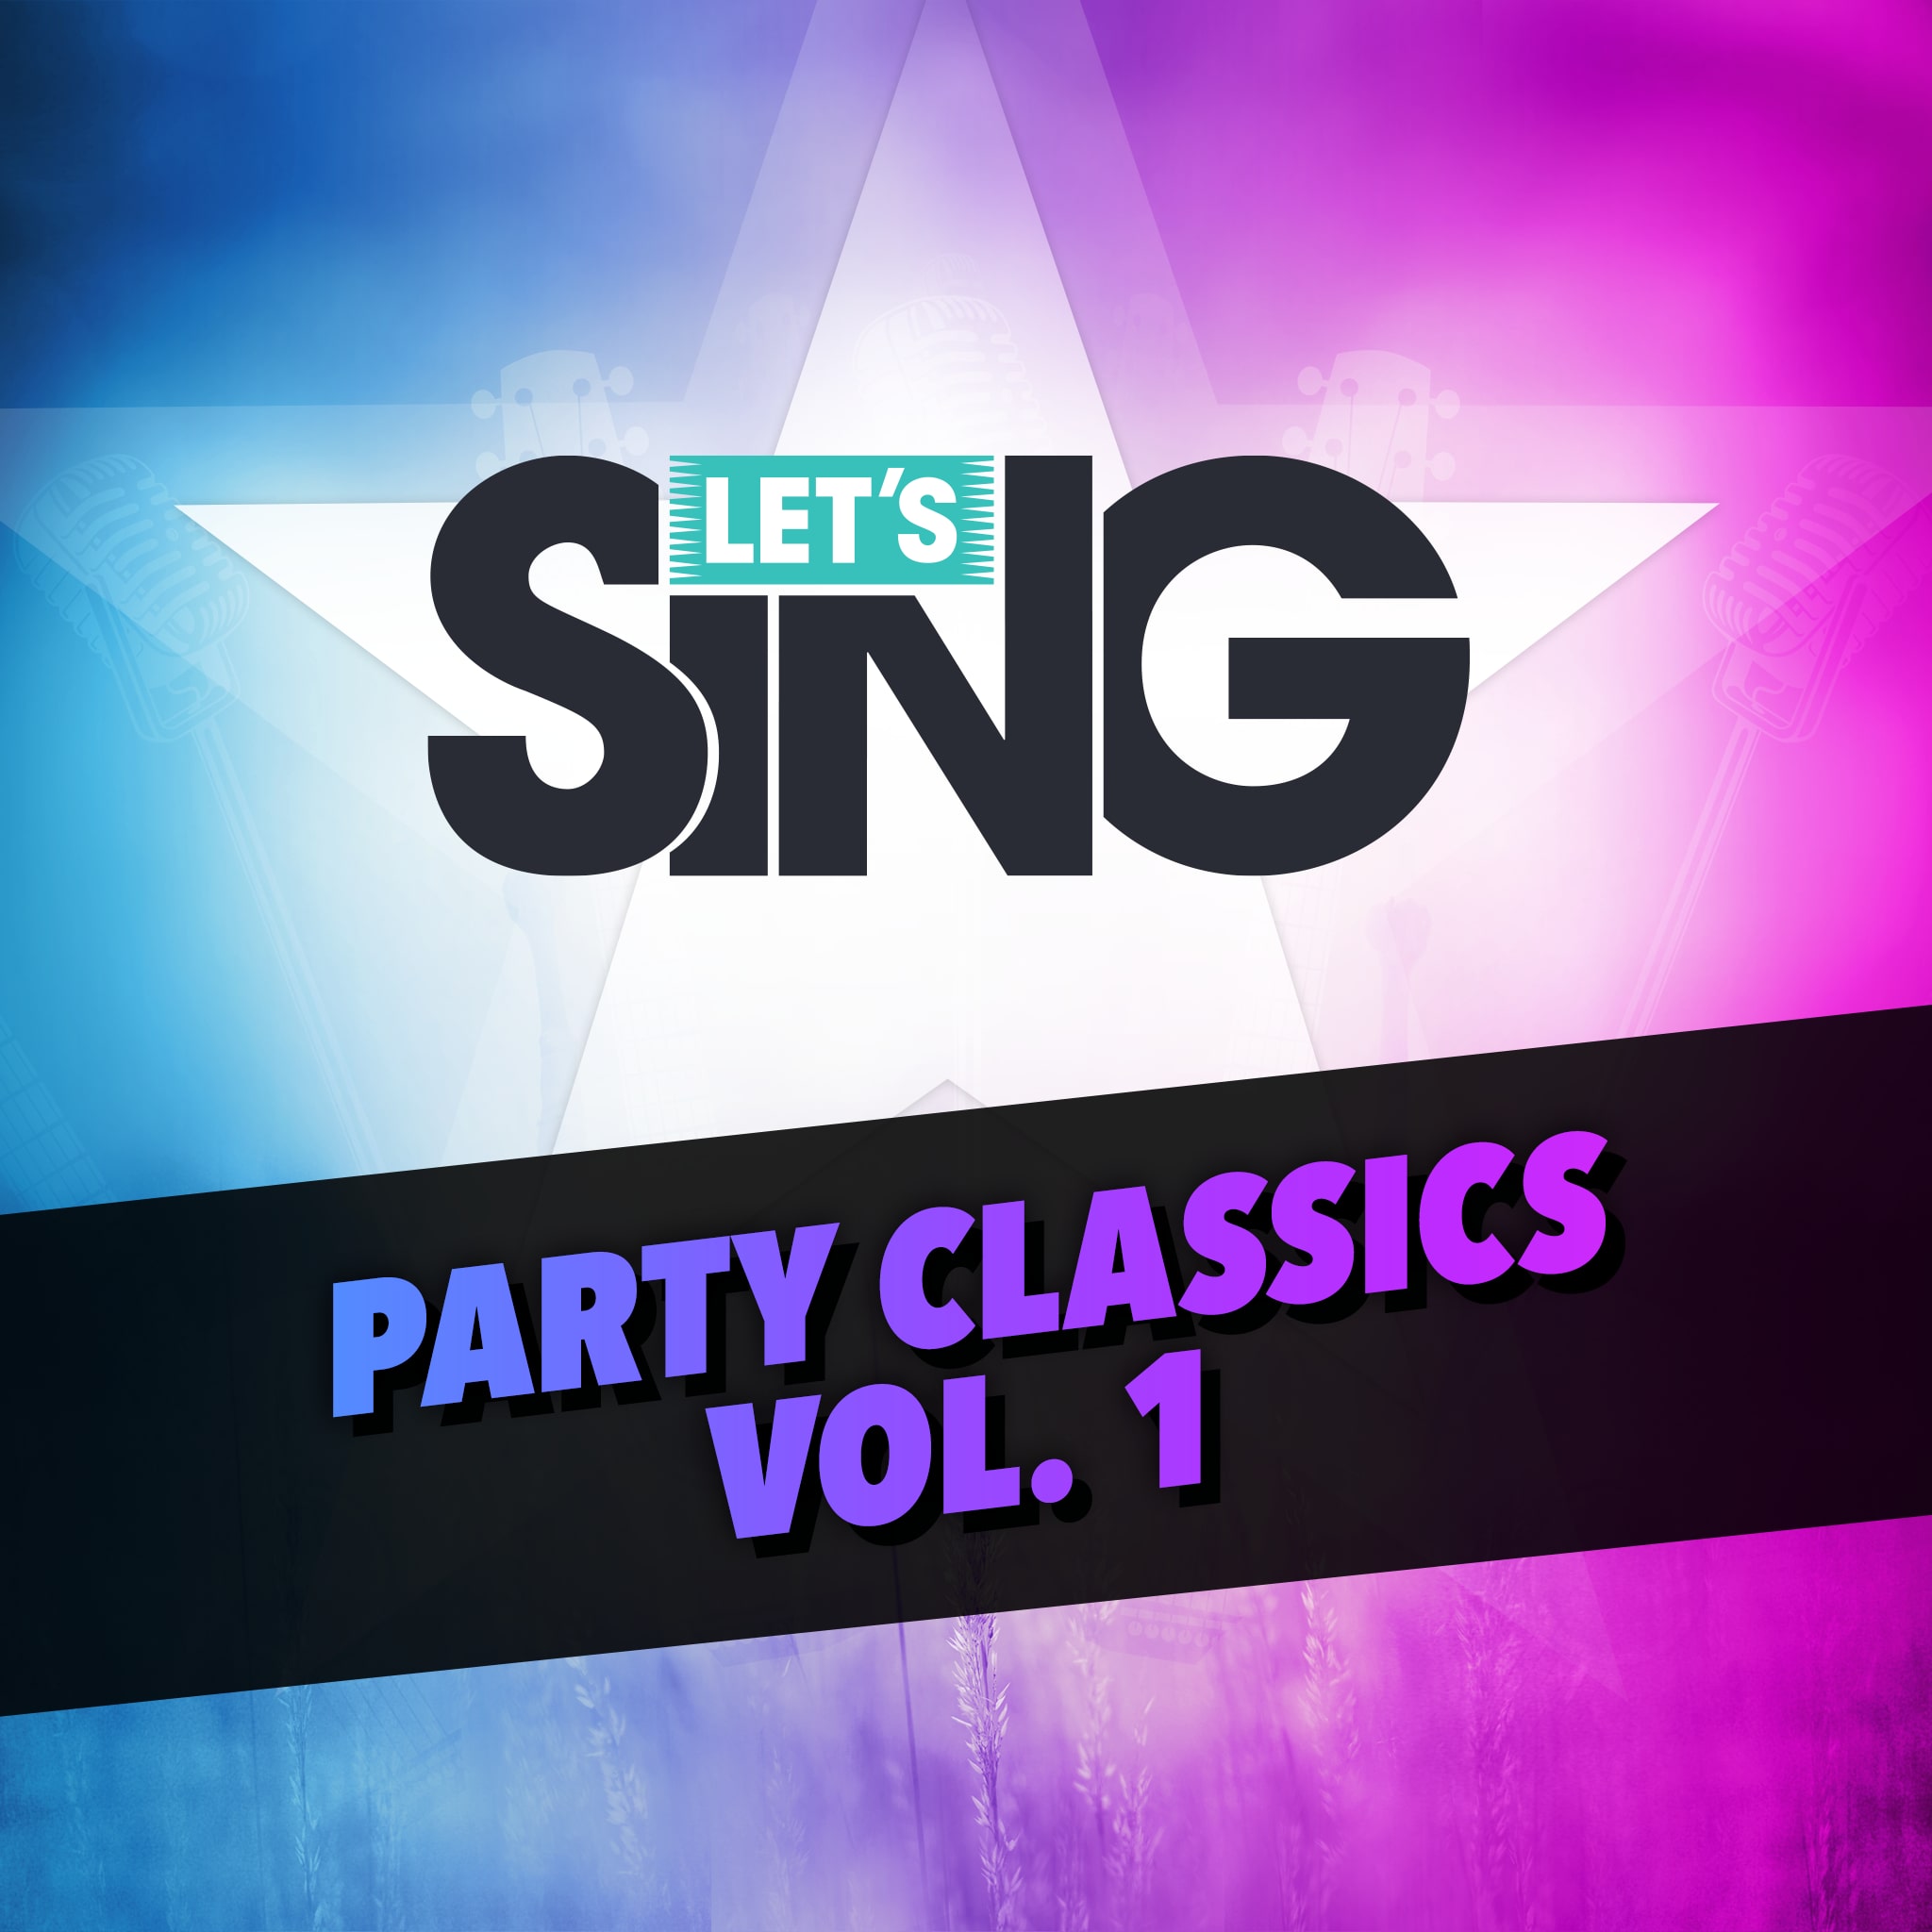 Let's Sing - Party Classics Vol. 1  Song Pack